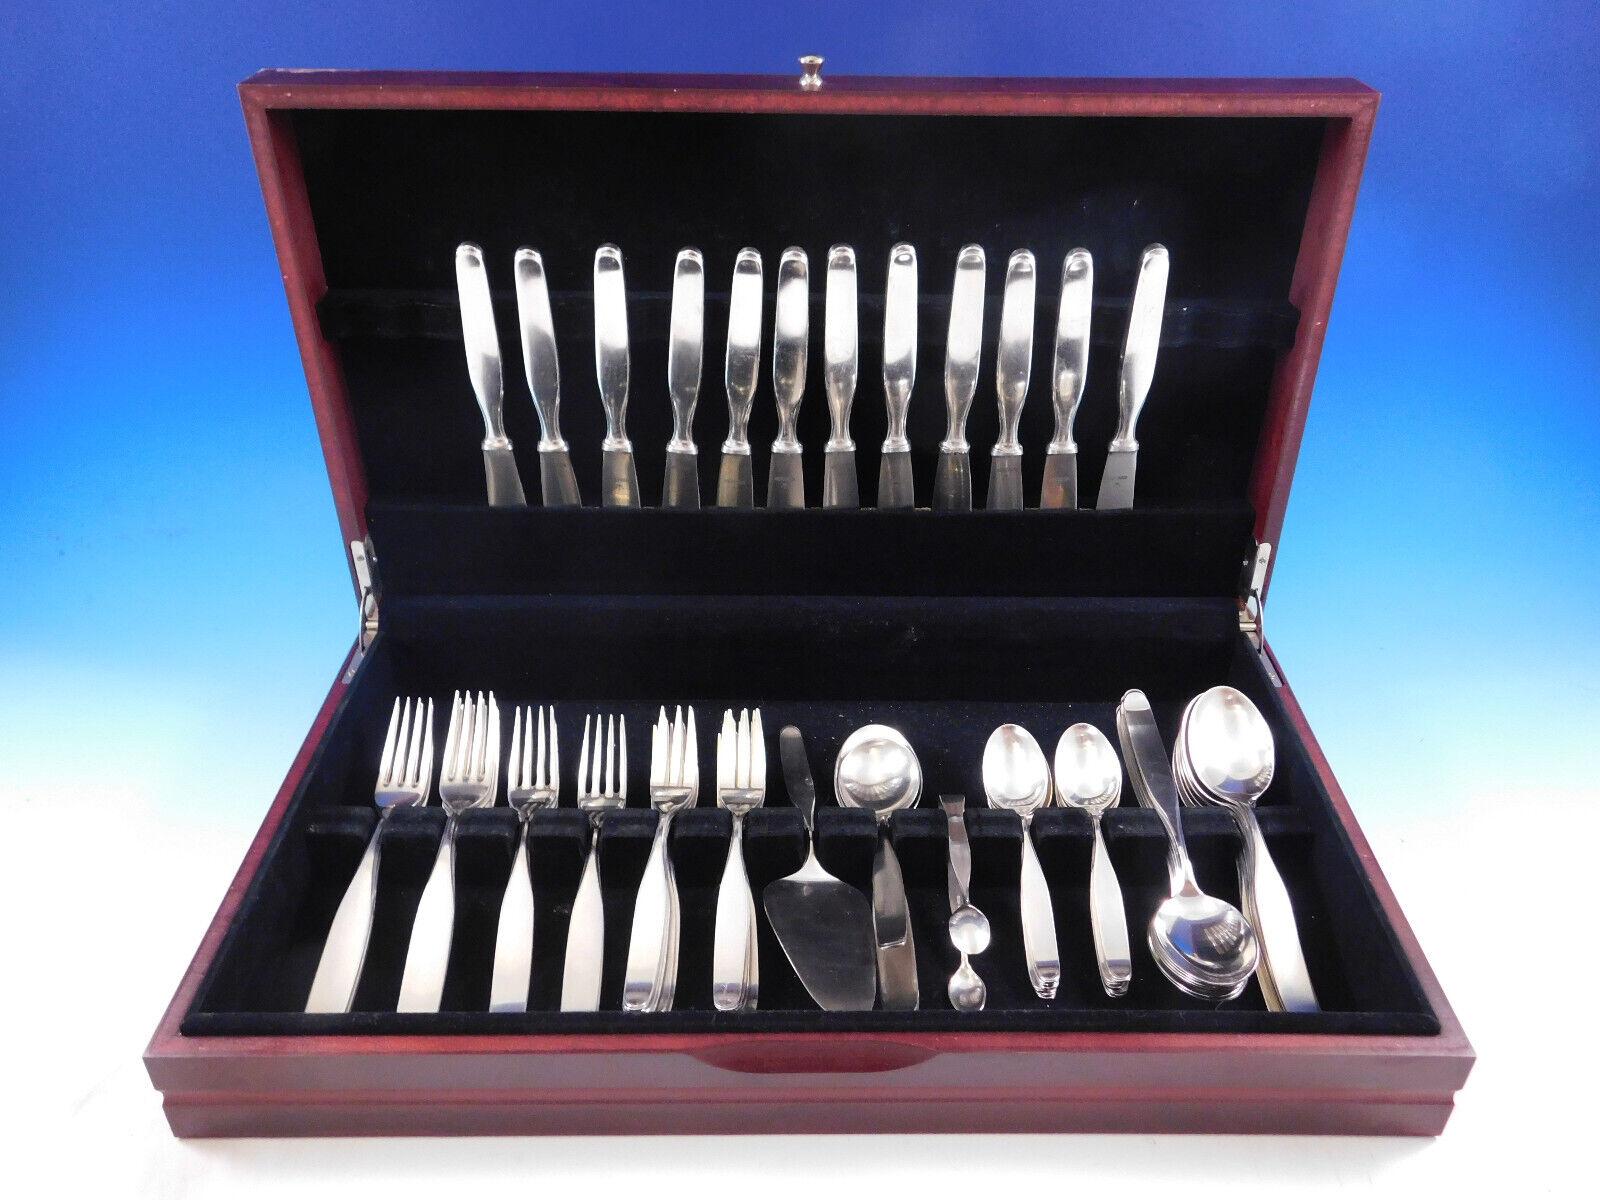 Constanze By Wilkens German 800 Silver Flatware set with modern unadorned design - 64 pieces. This set includes:

12 Knives, 7 7/8